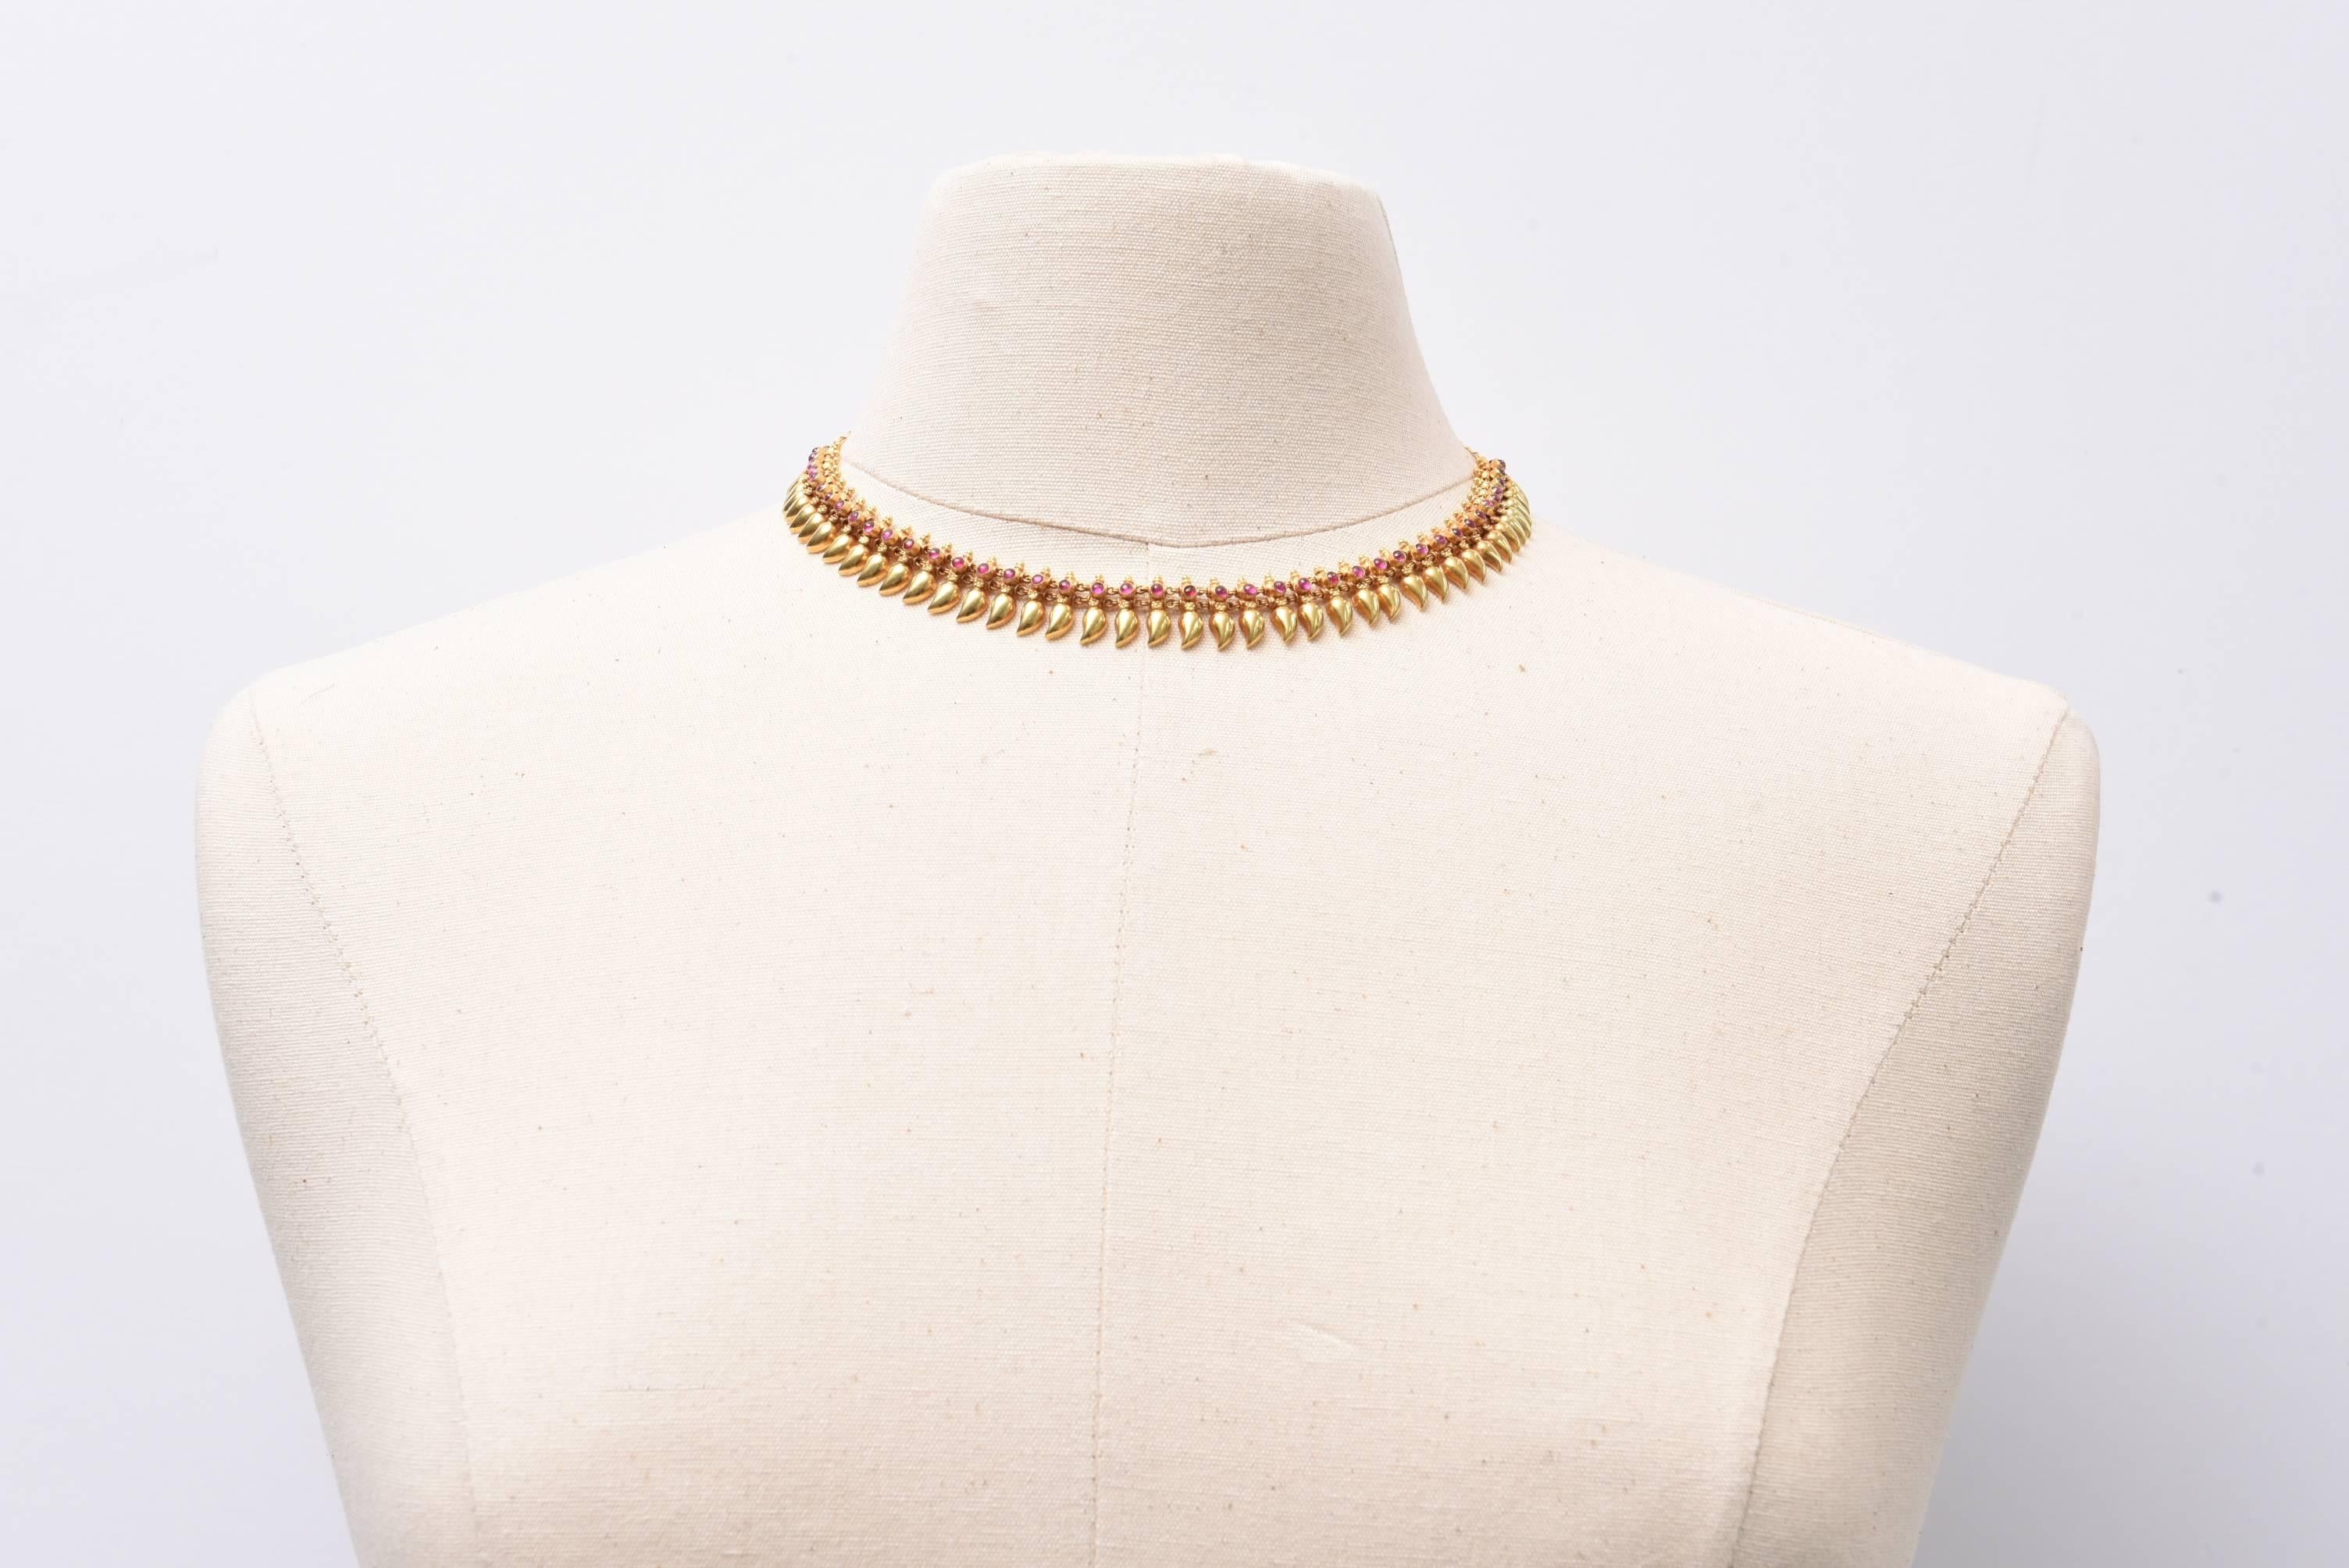 Exquisite 22K gold necklace with cabochon rubies.  Nice on an open neckline or inside a button down shirt.  Links at the back allow for some adjust-ability.  Length range is 15 inches to 16.5 inches.  Lovely granulation work on the gold.   Elegant